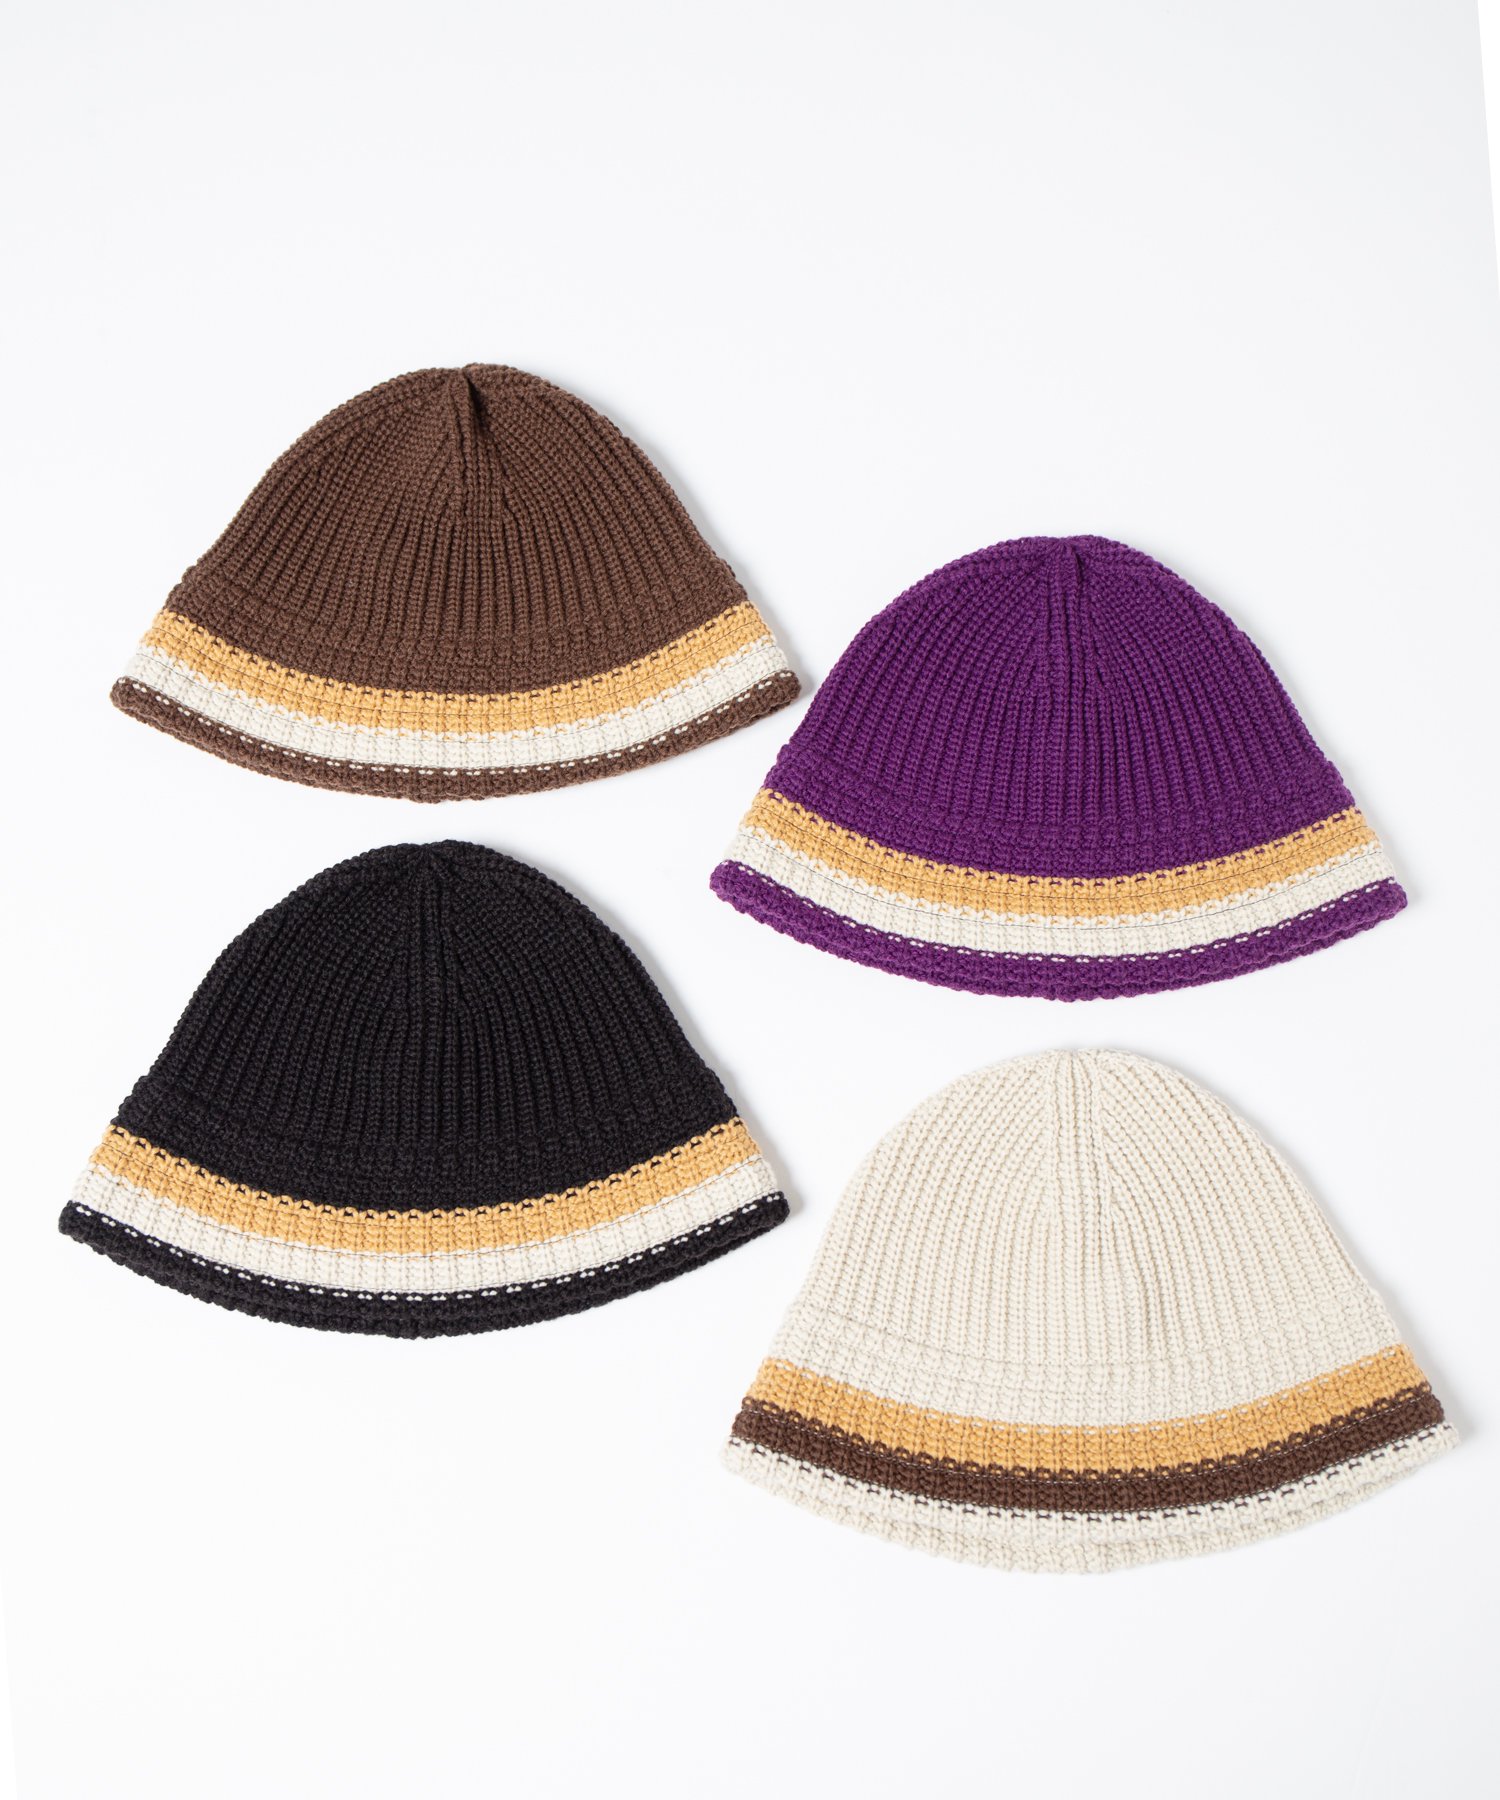 RACAL Border Line Knit Round Hat 1307 ボーダーニットハット